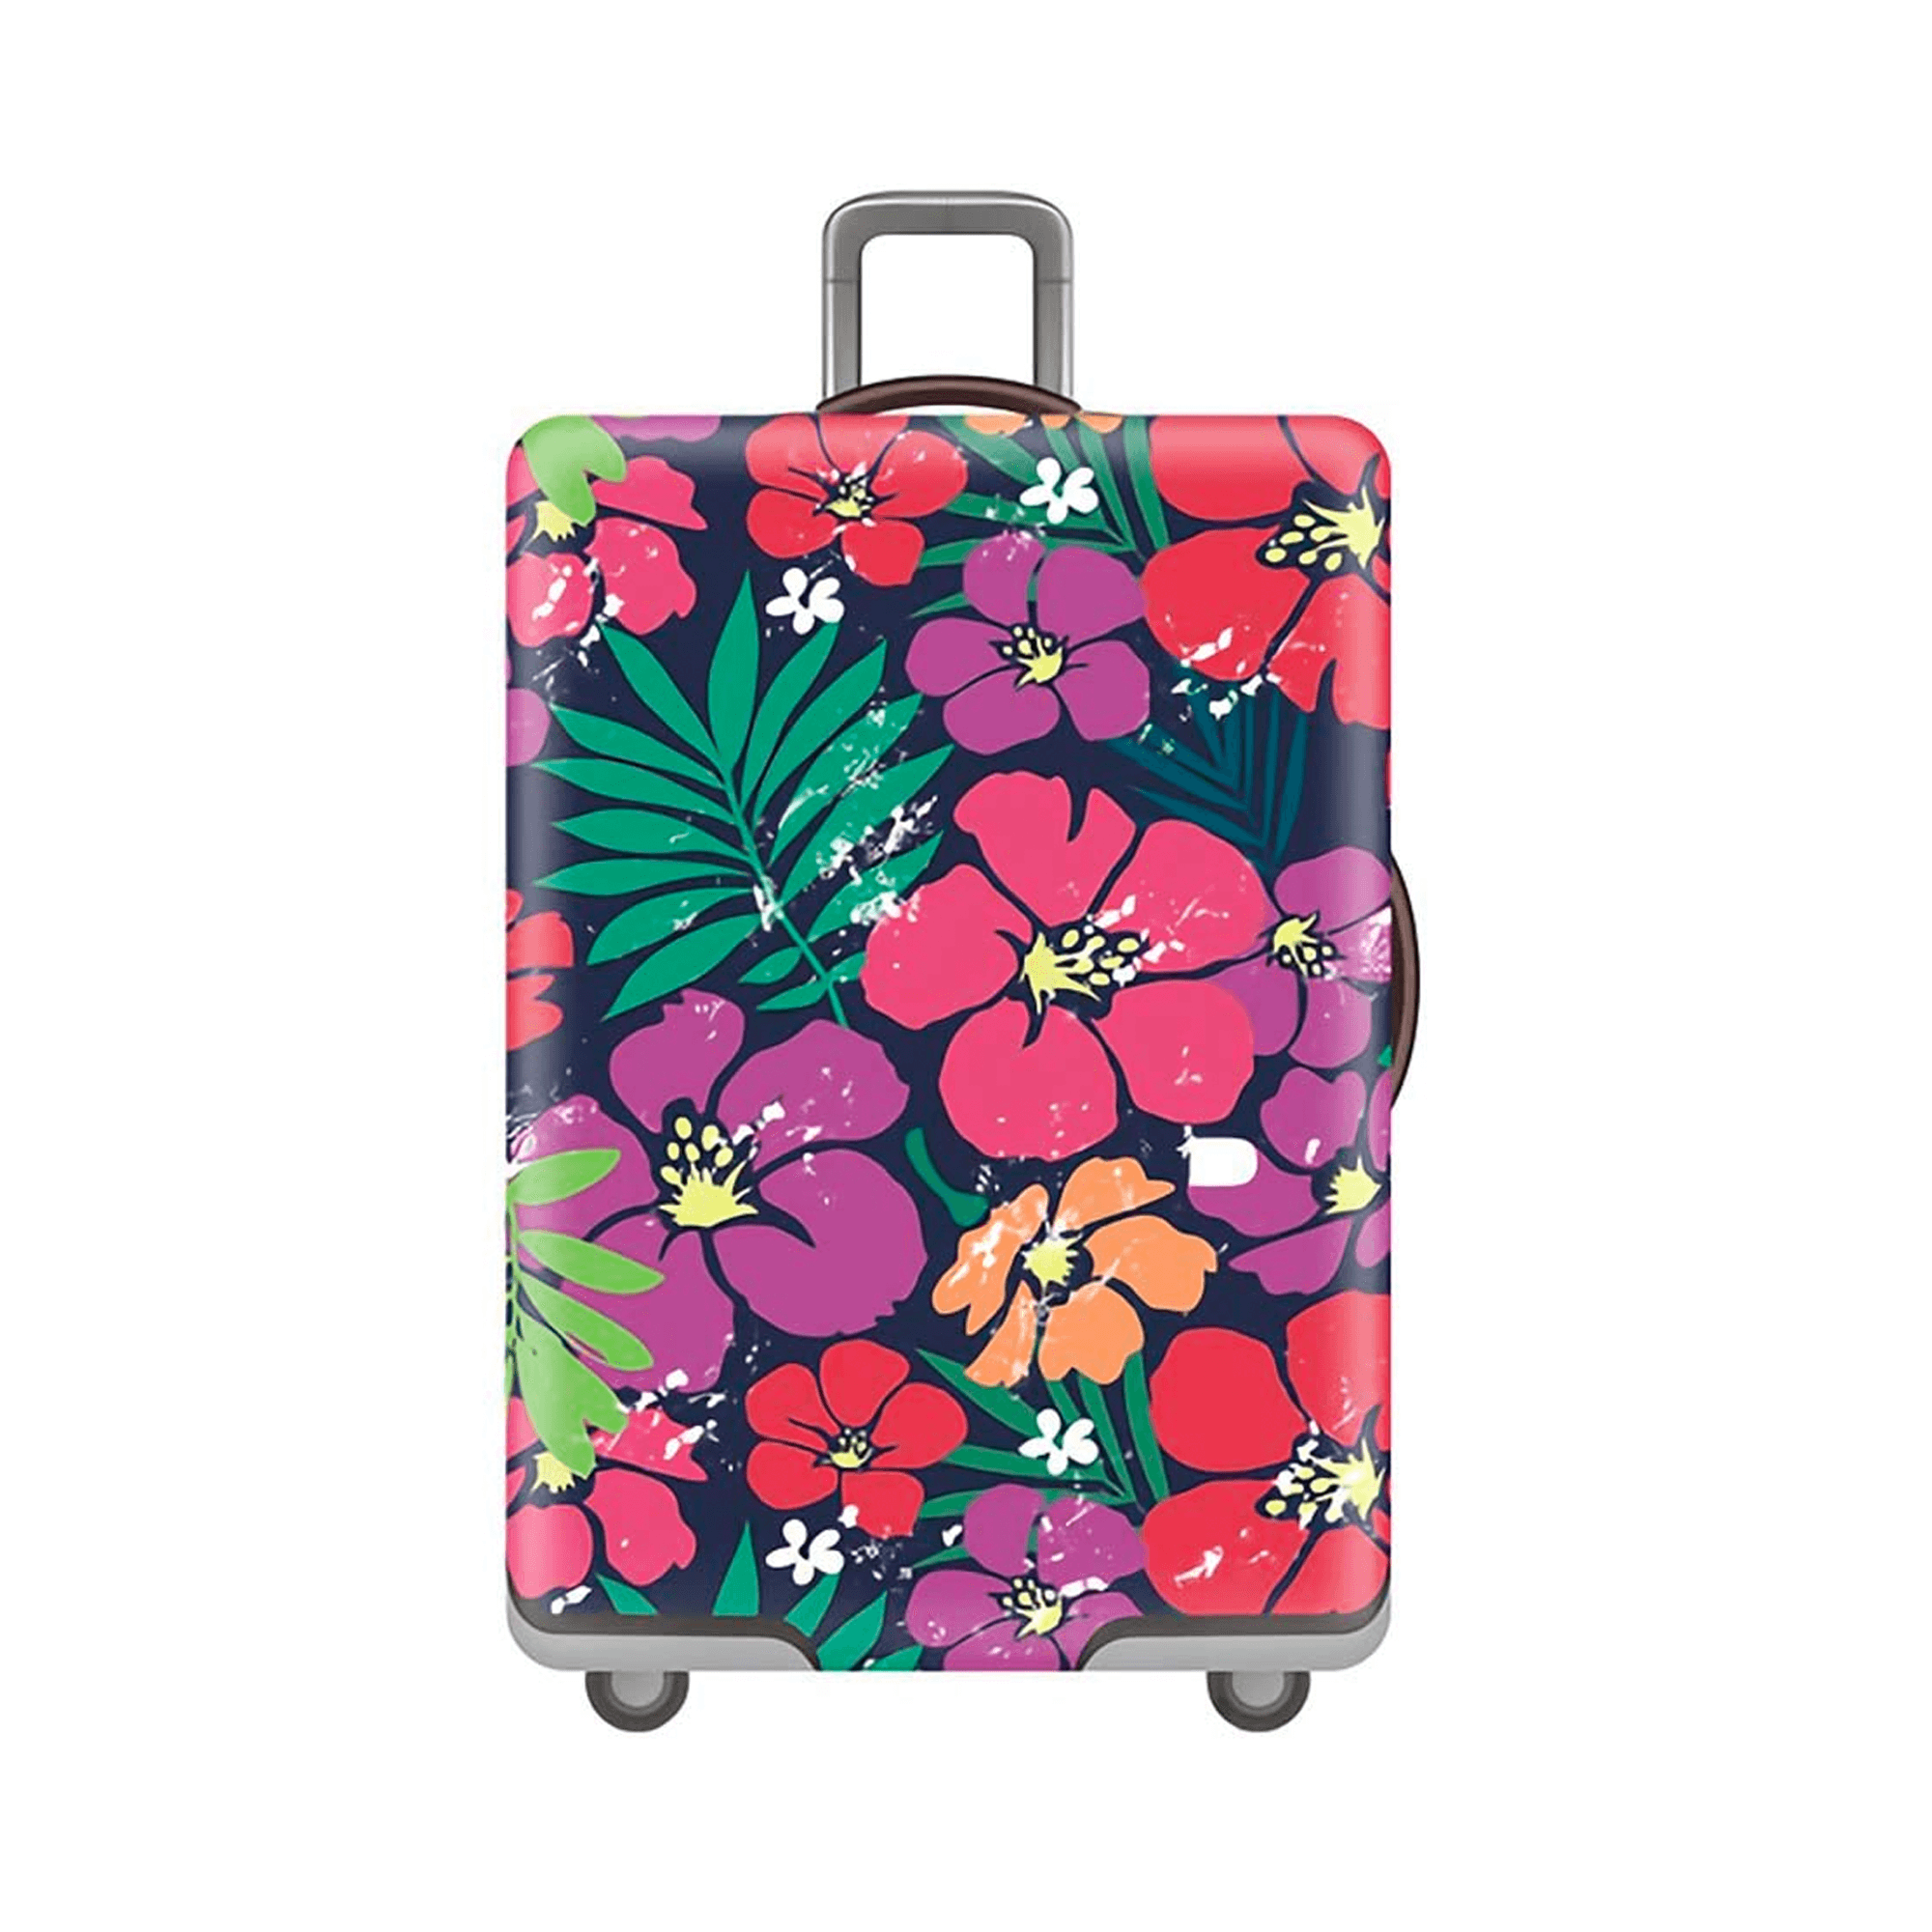 Travel Trolley Case Cover Protector Suitcase Cover Luggage Storage Covers |  eBay